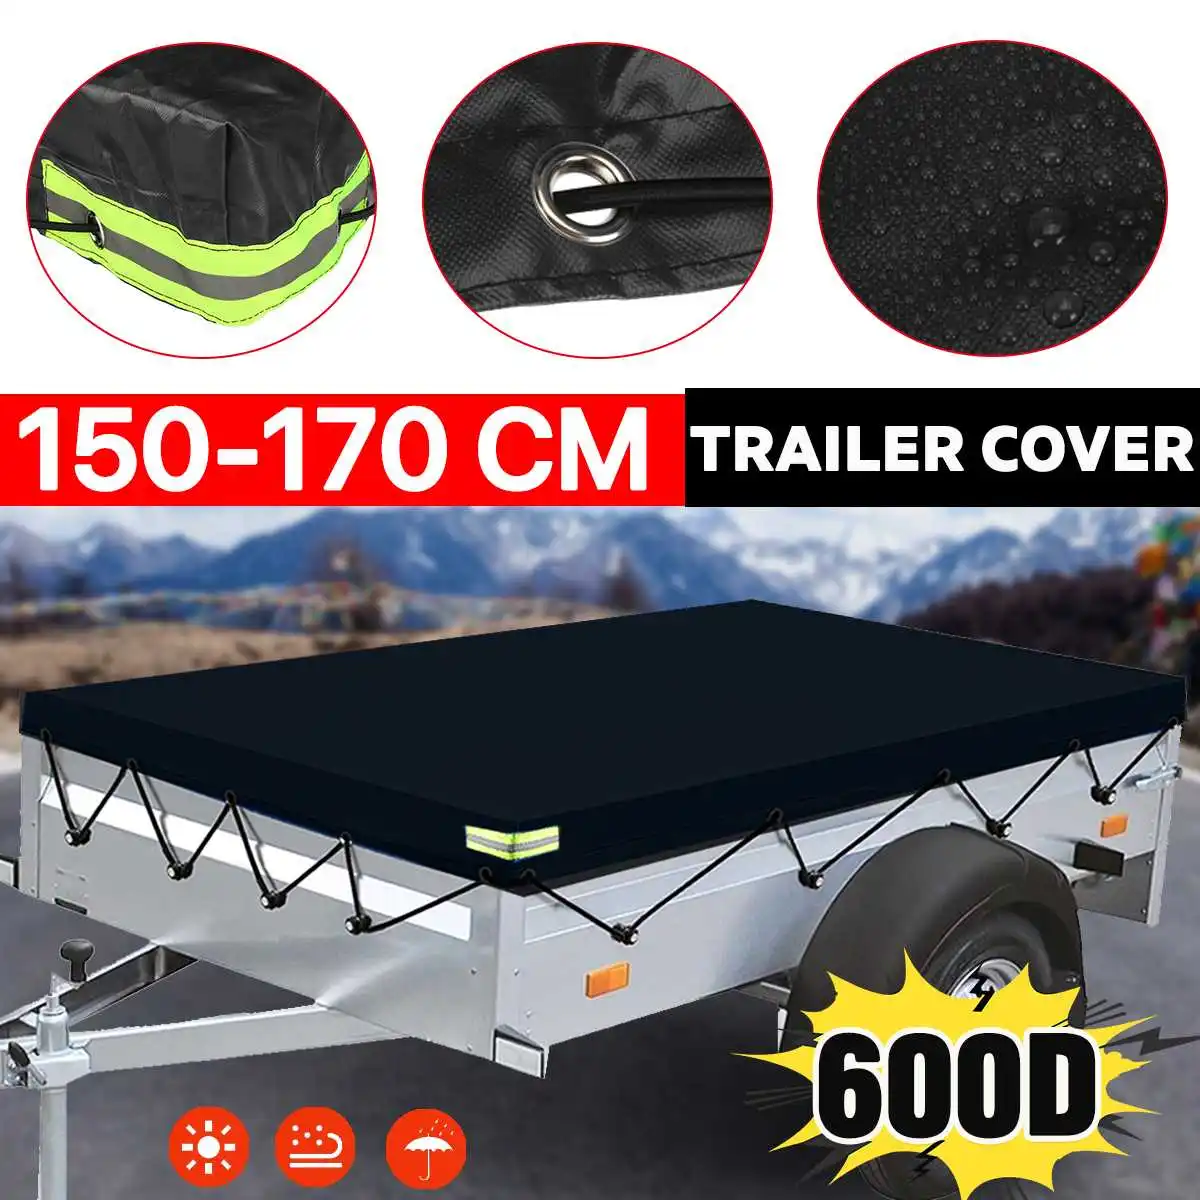 

150-170cm Camper Trailer Cover Roof Tent Canopy 600D Waterproof Dust-proof Windproof Travel Camping Canopy Cover Protection